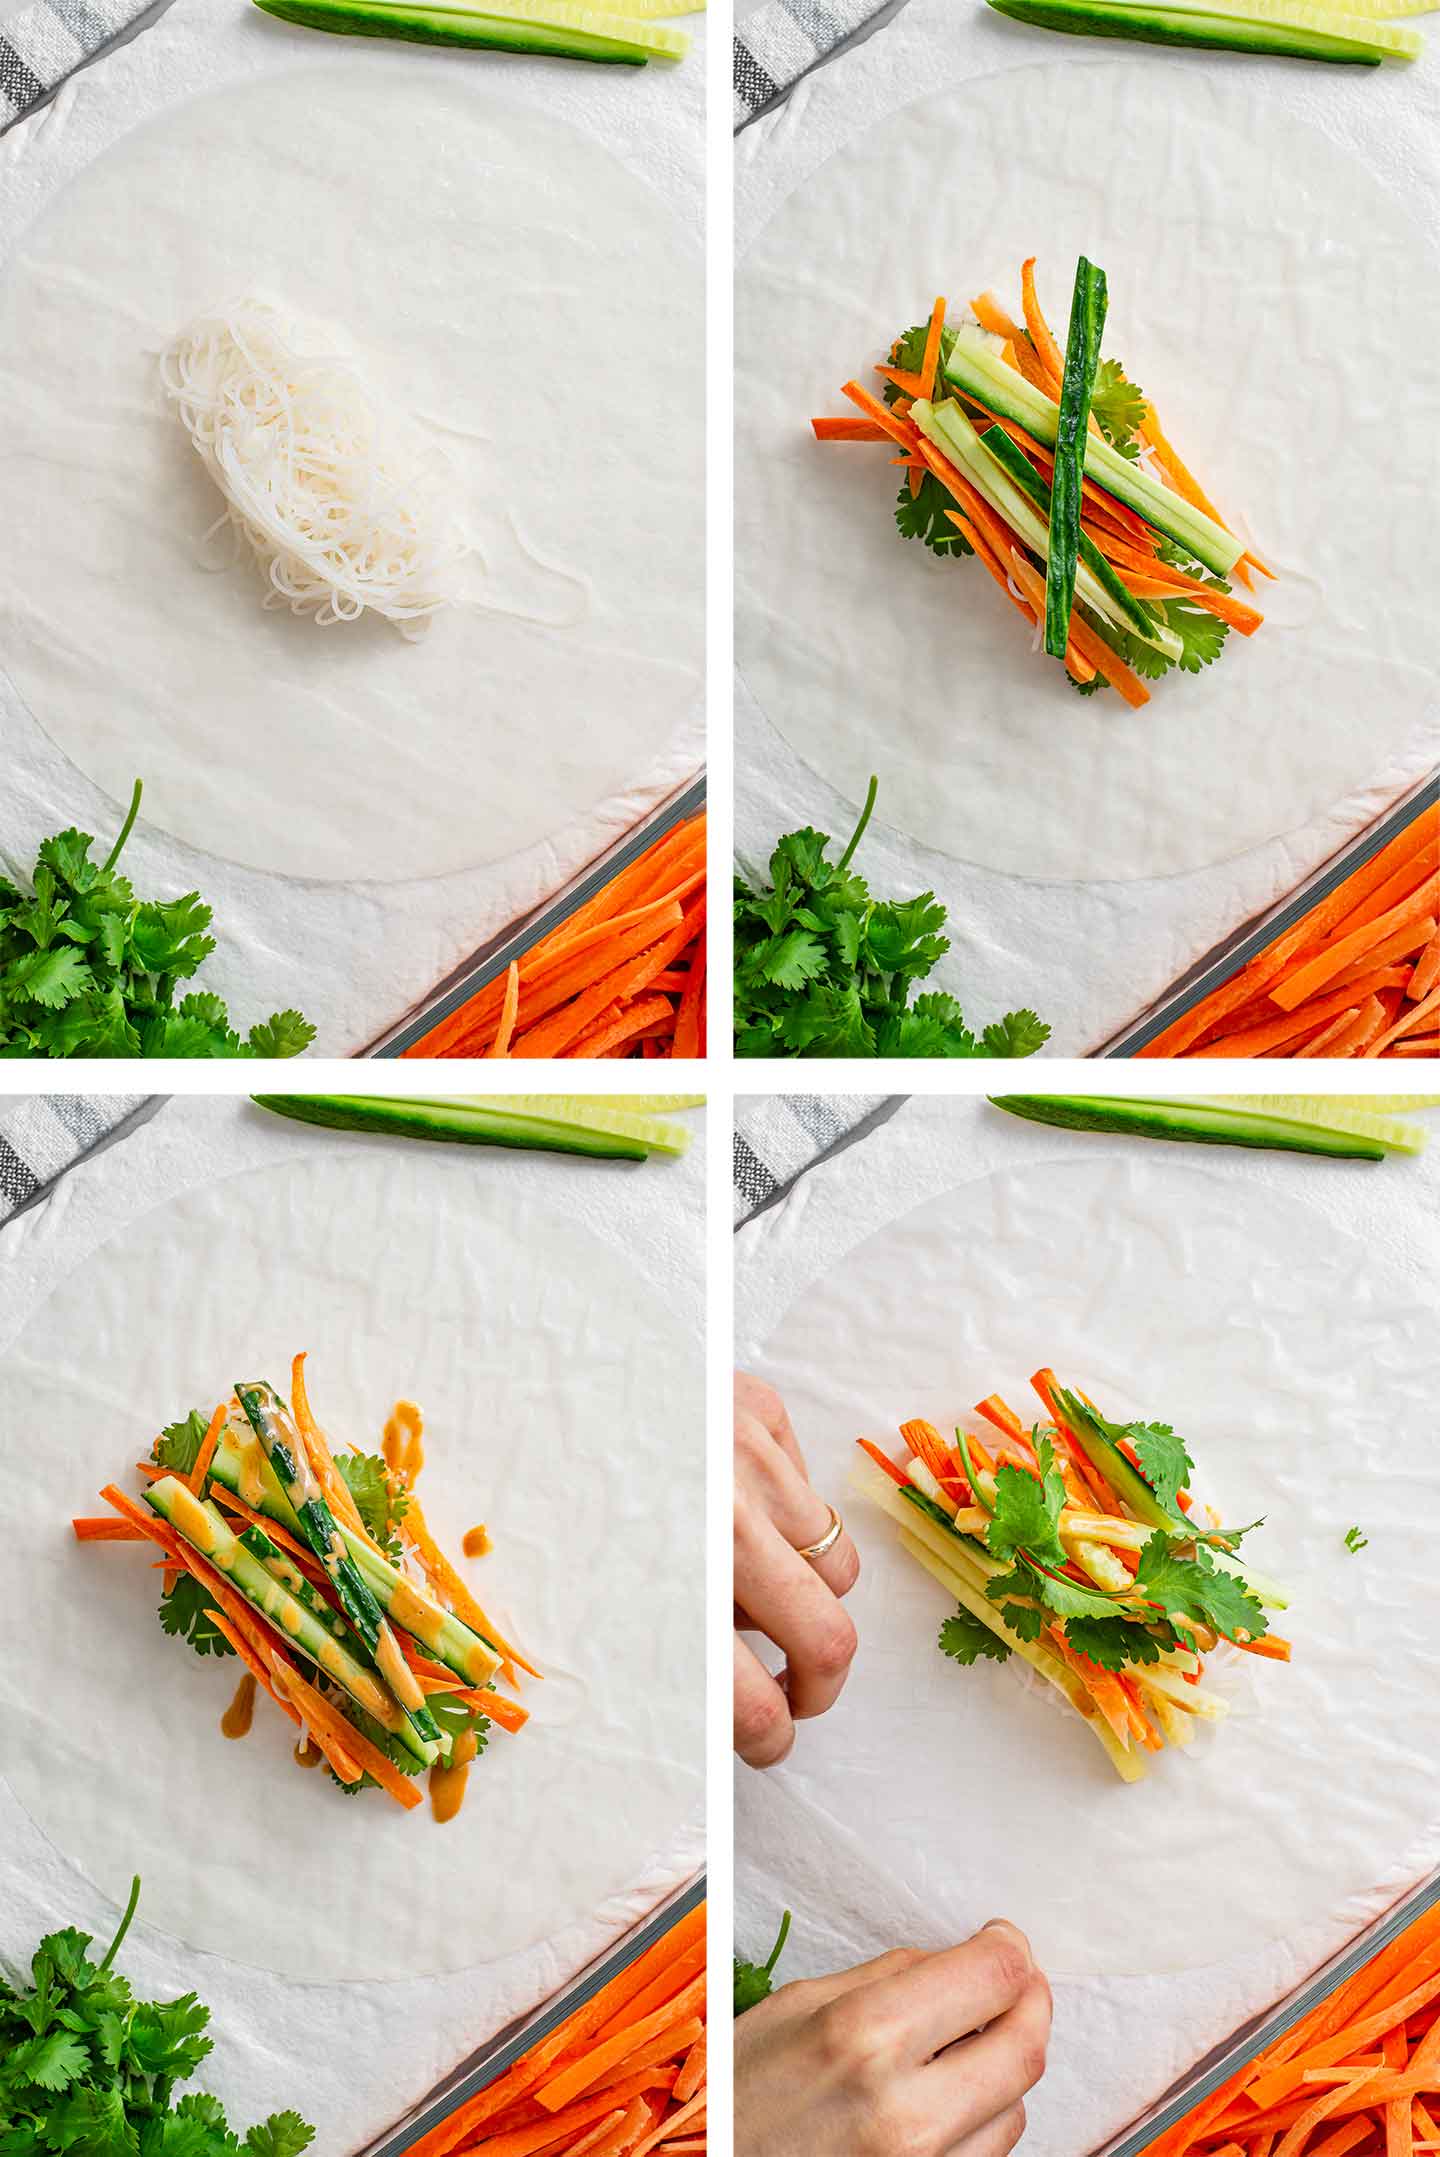 Top down grid of four process photos. Rice noodles are laid on a rice wrapper. Then veggies are layered on top, then peanut sauce is drizzled, and finally, two hands grip lift one side of the paper in preparation for folding.